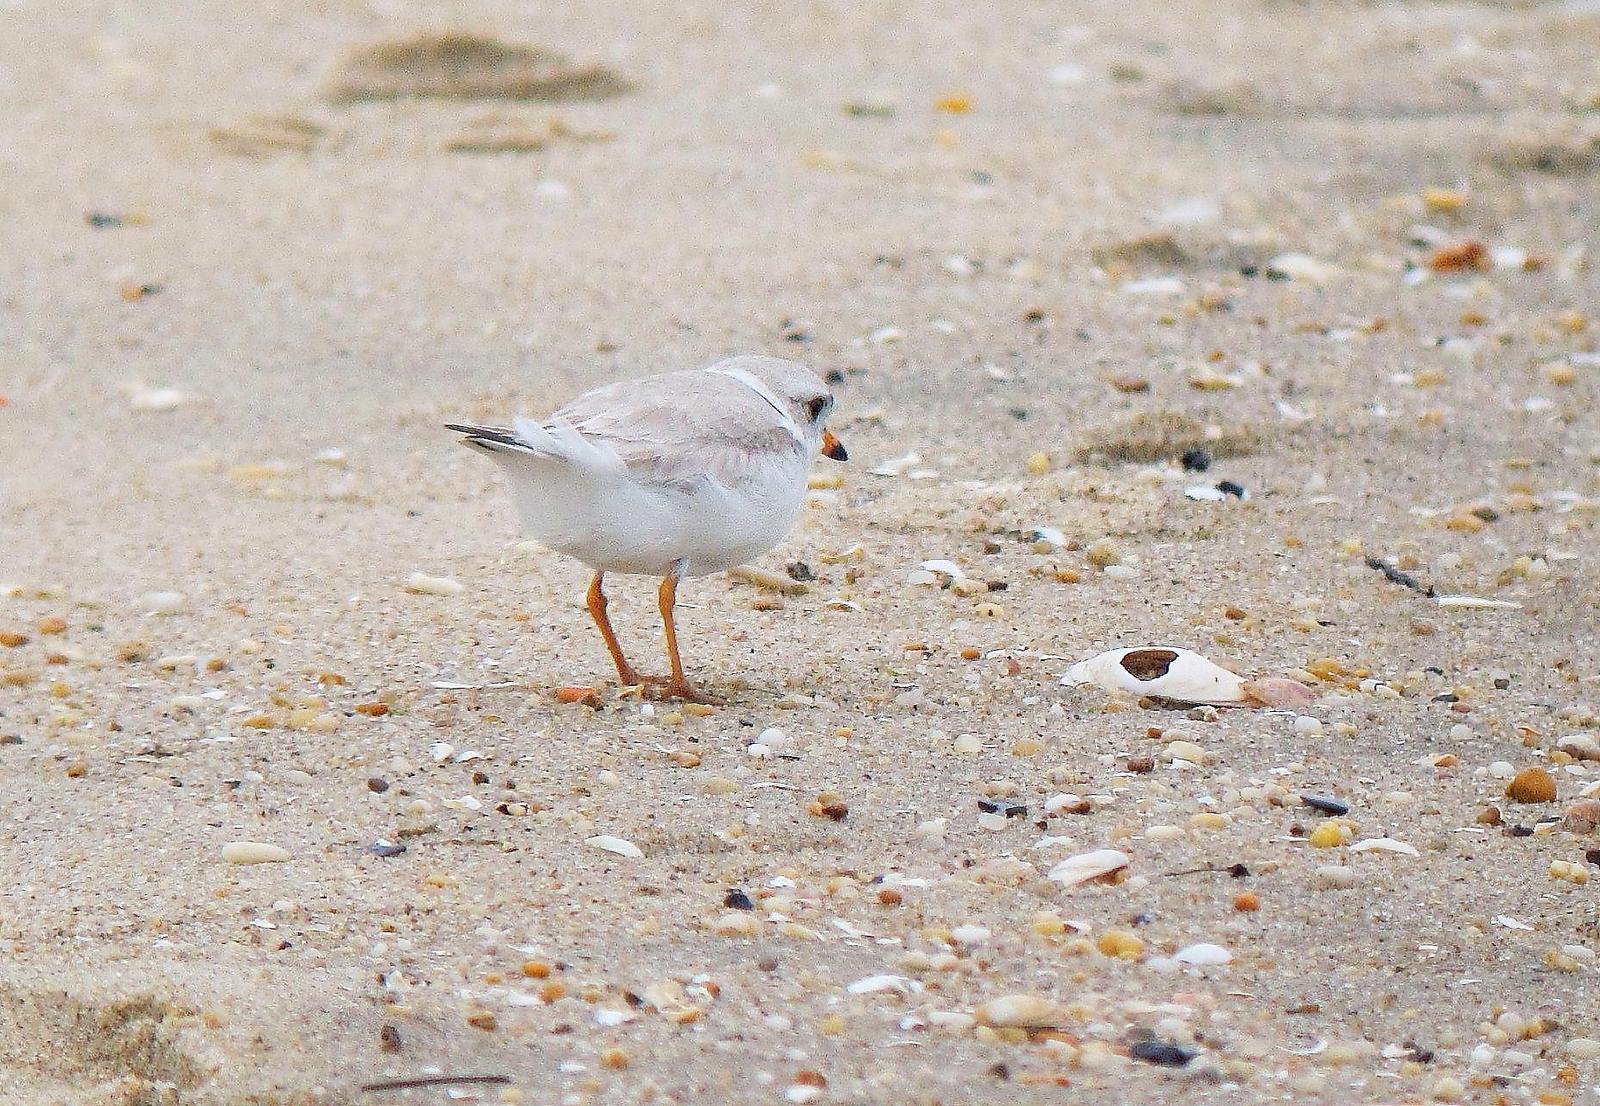 Piping Plover Photo by Joseph Pescatore